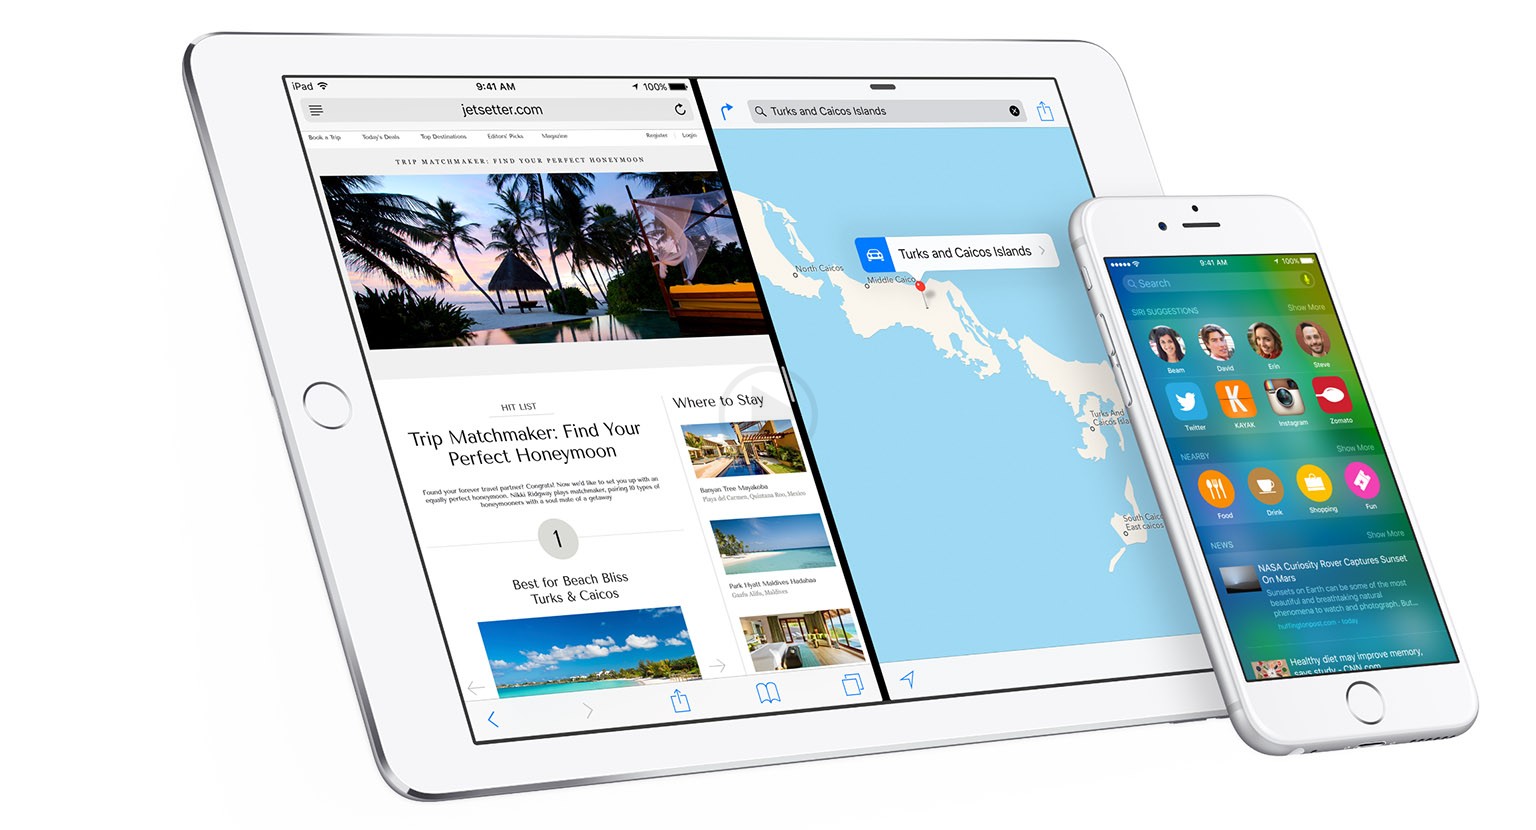 Apple Confirms The Launch Of iOS 9.3